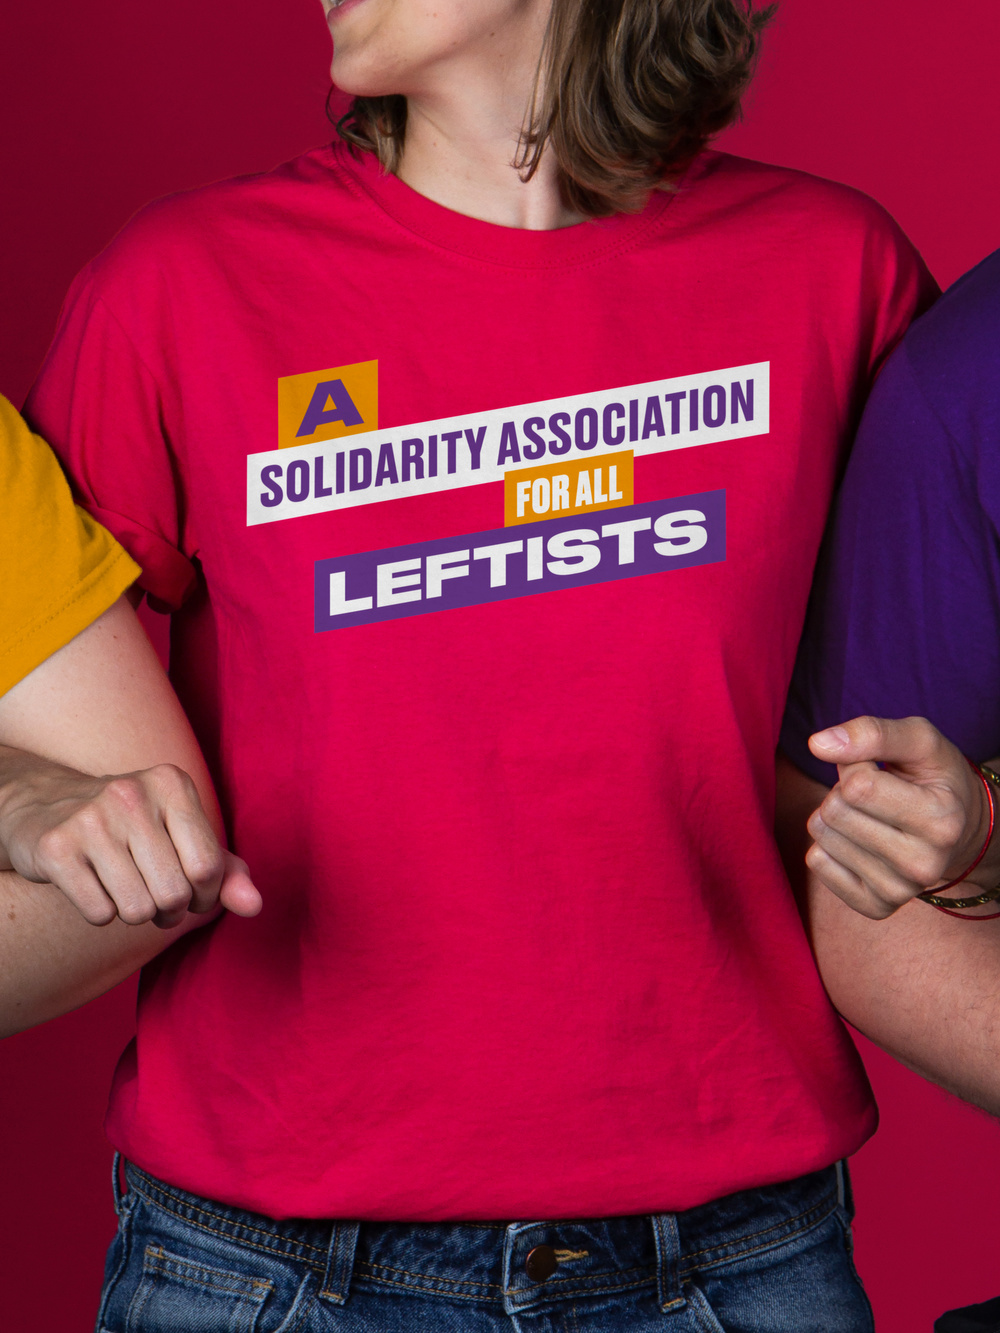 A Solidarity Association for all Leftists